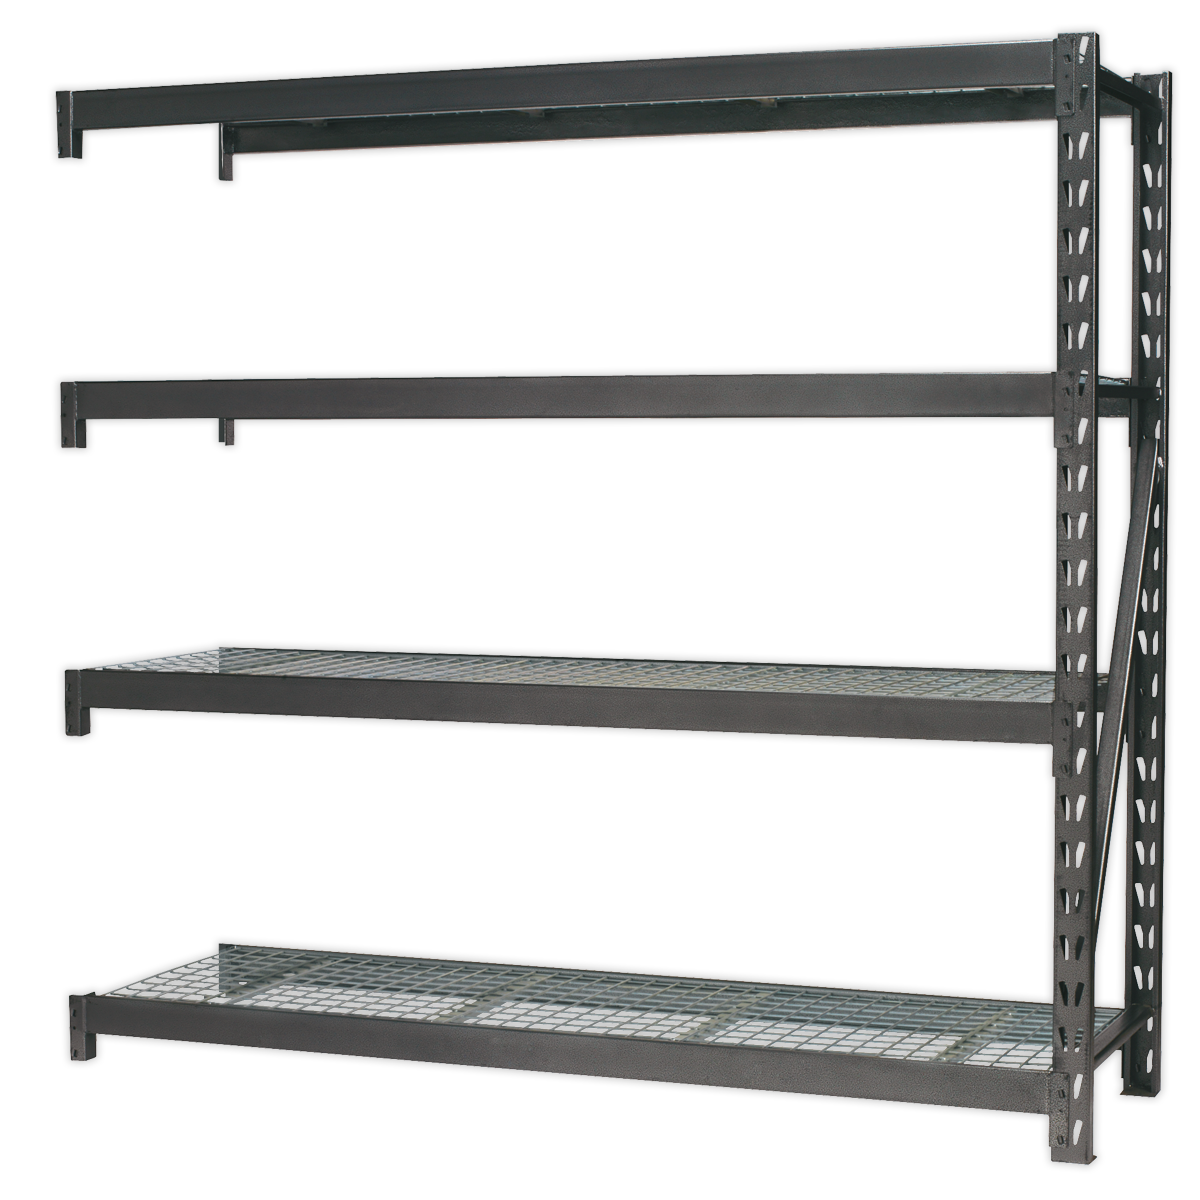 Sealey Heavy-Duty Racking Extension Pack with 4 Mesh Shelves 640kg Capacity Per Level AP6572E